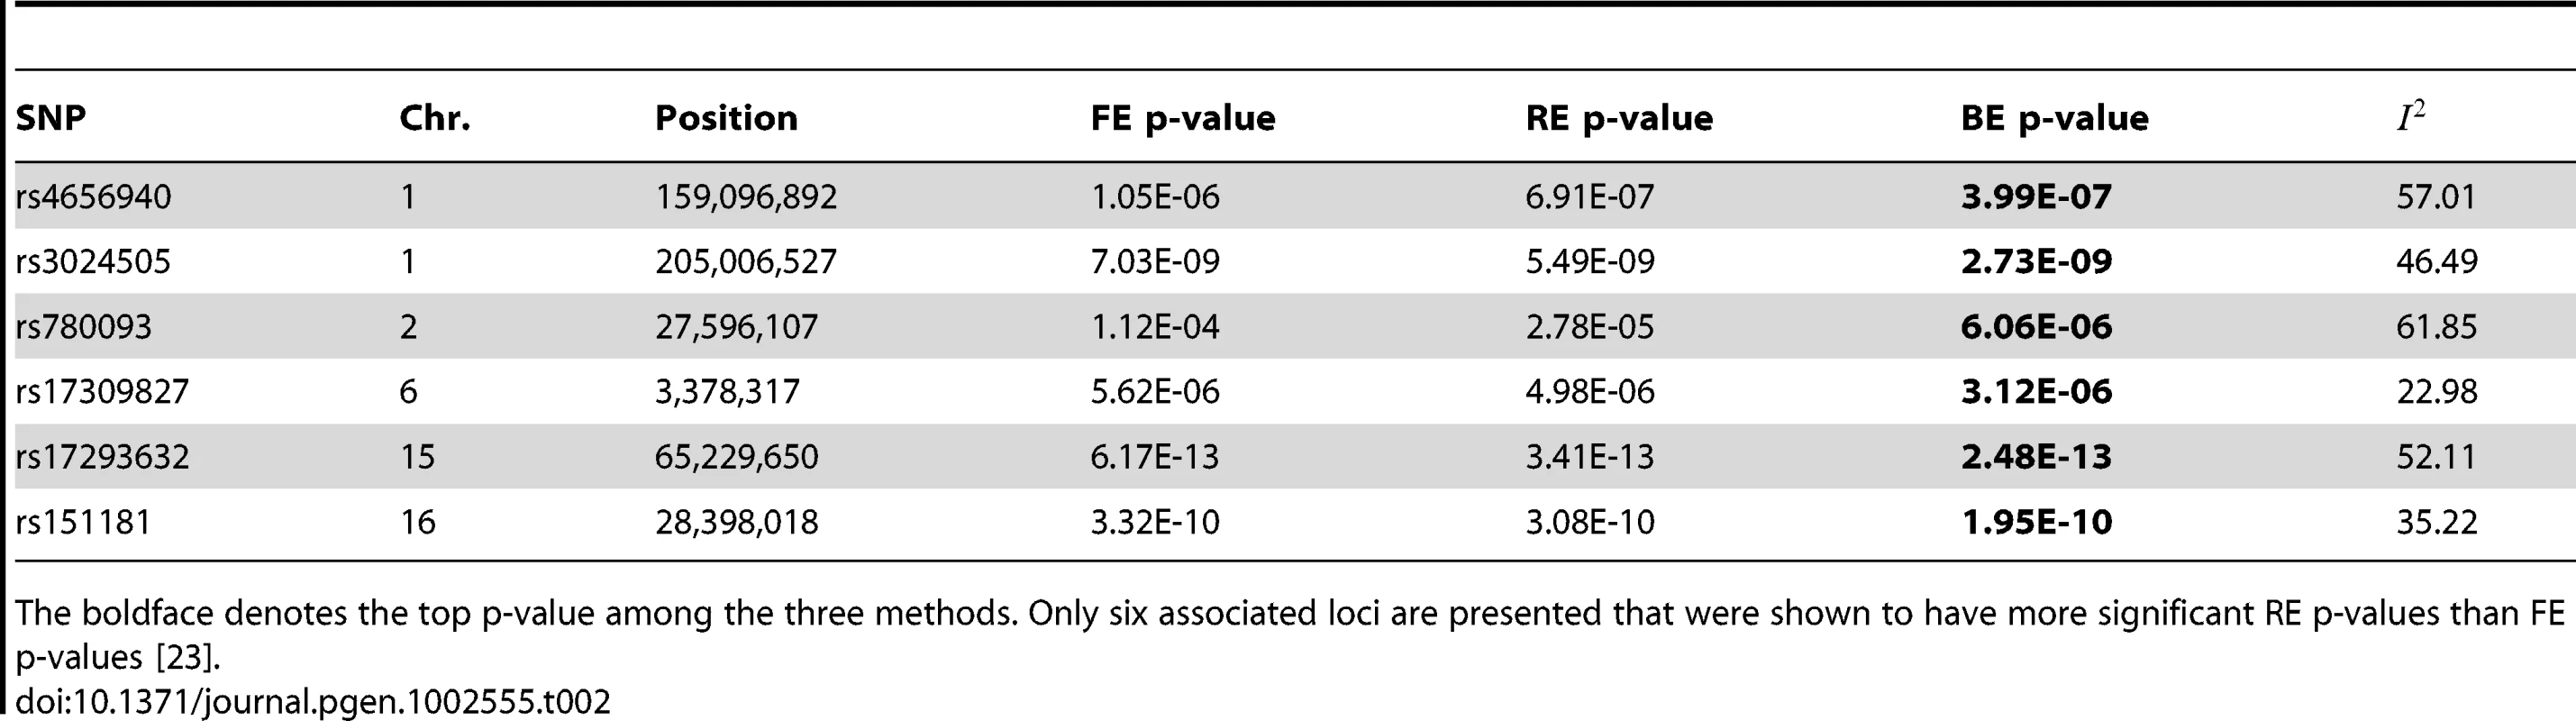 Application of FE, RE, and BE to the Crohns disease meta-analysis results of Franke <i>et al.</i> <em class=&quot;ref&quot;>[13]</em>.